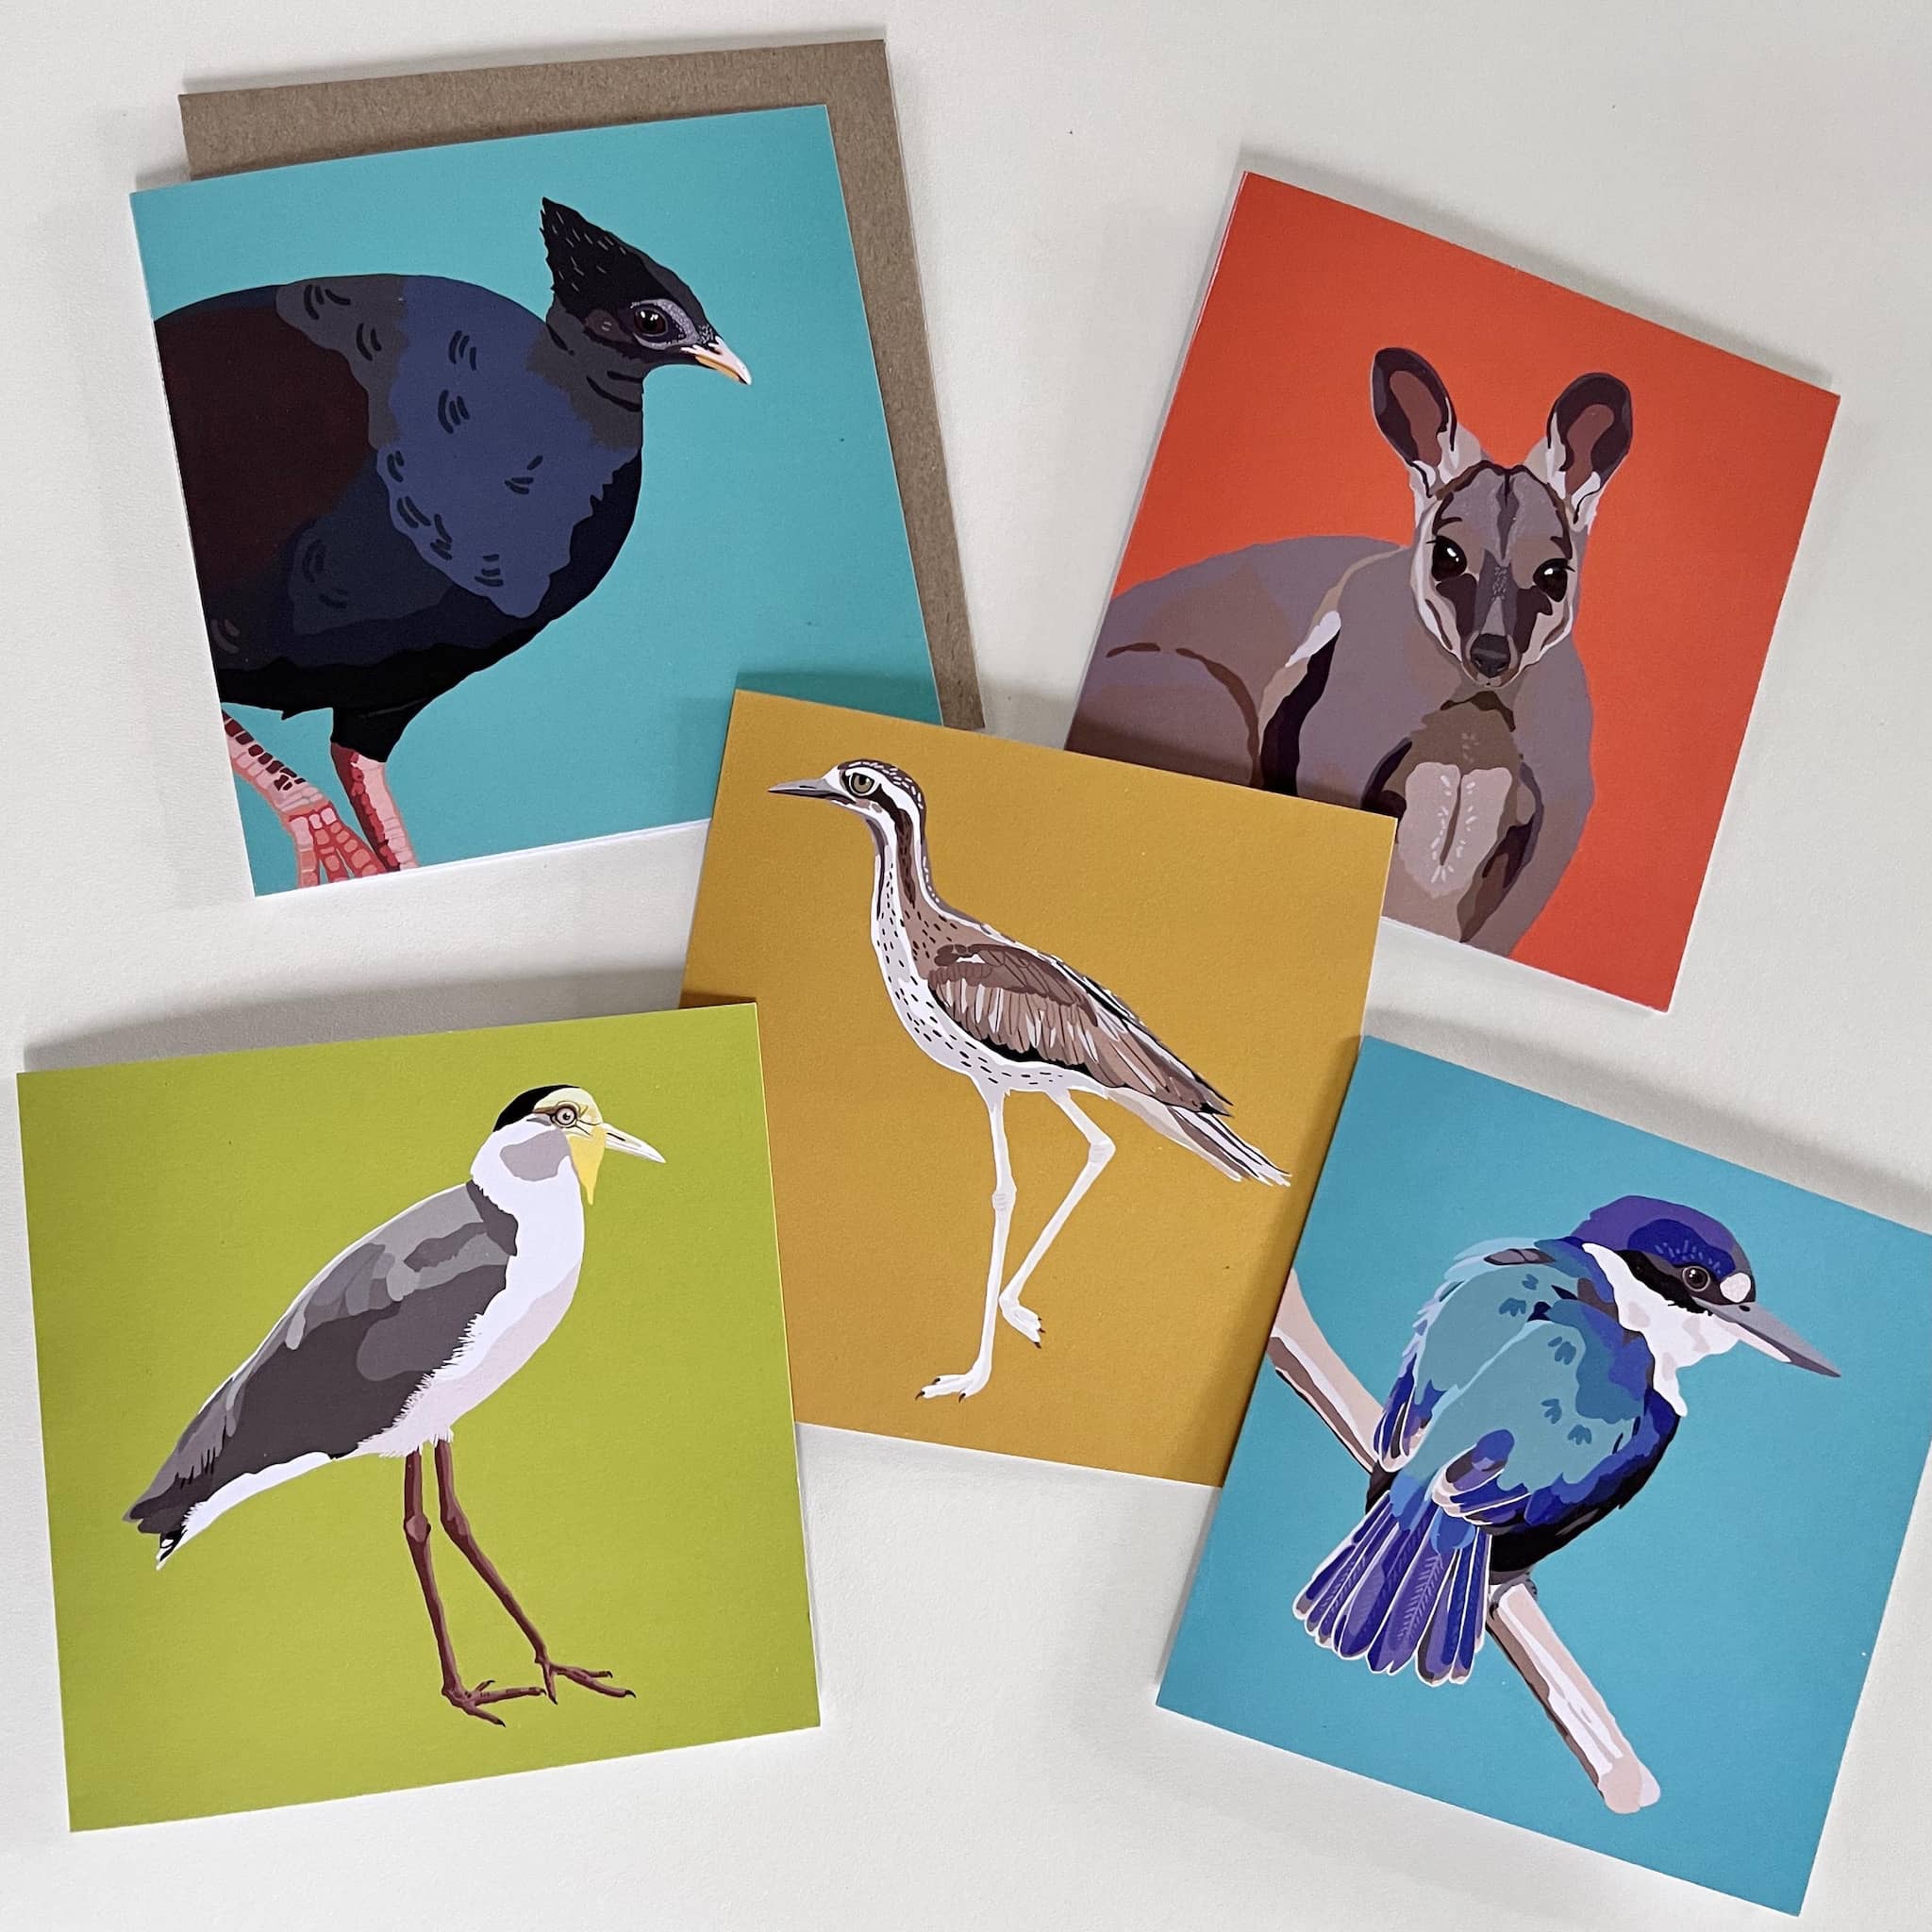 Collection of illustrated greetings cards celebrating Northern Territory wildlife.